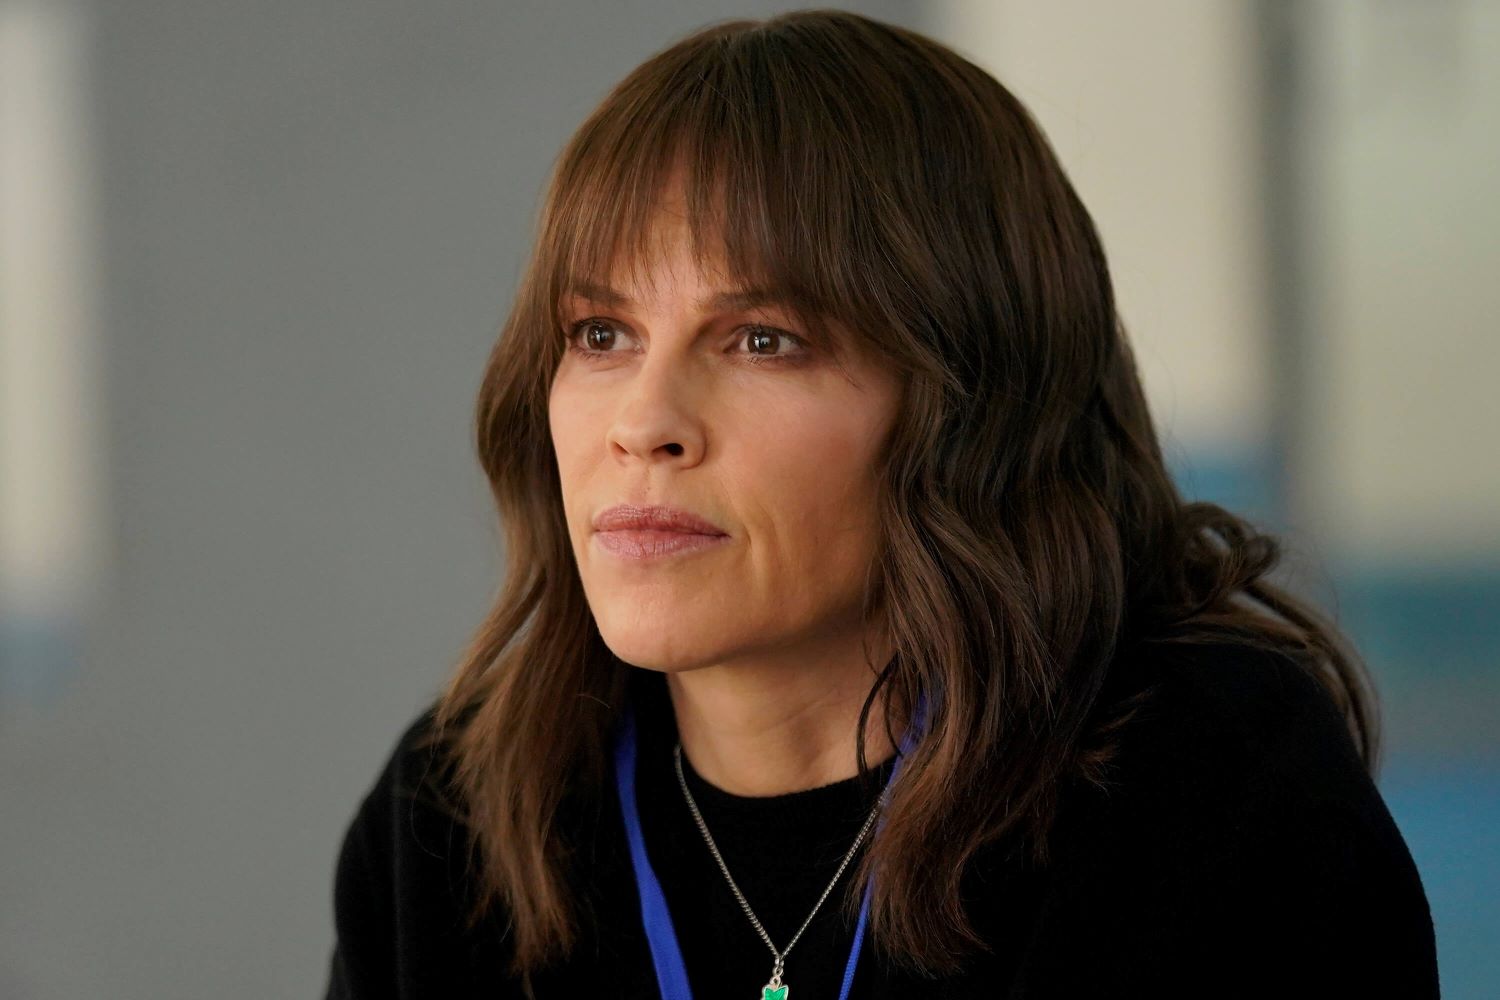 Hilary Swank, in character as Eileen Fitzgerald in 'Alaska Daily' Episode 8, wears a black sweater, blue lanyard, and silver necklace with a small green pendant.